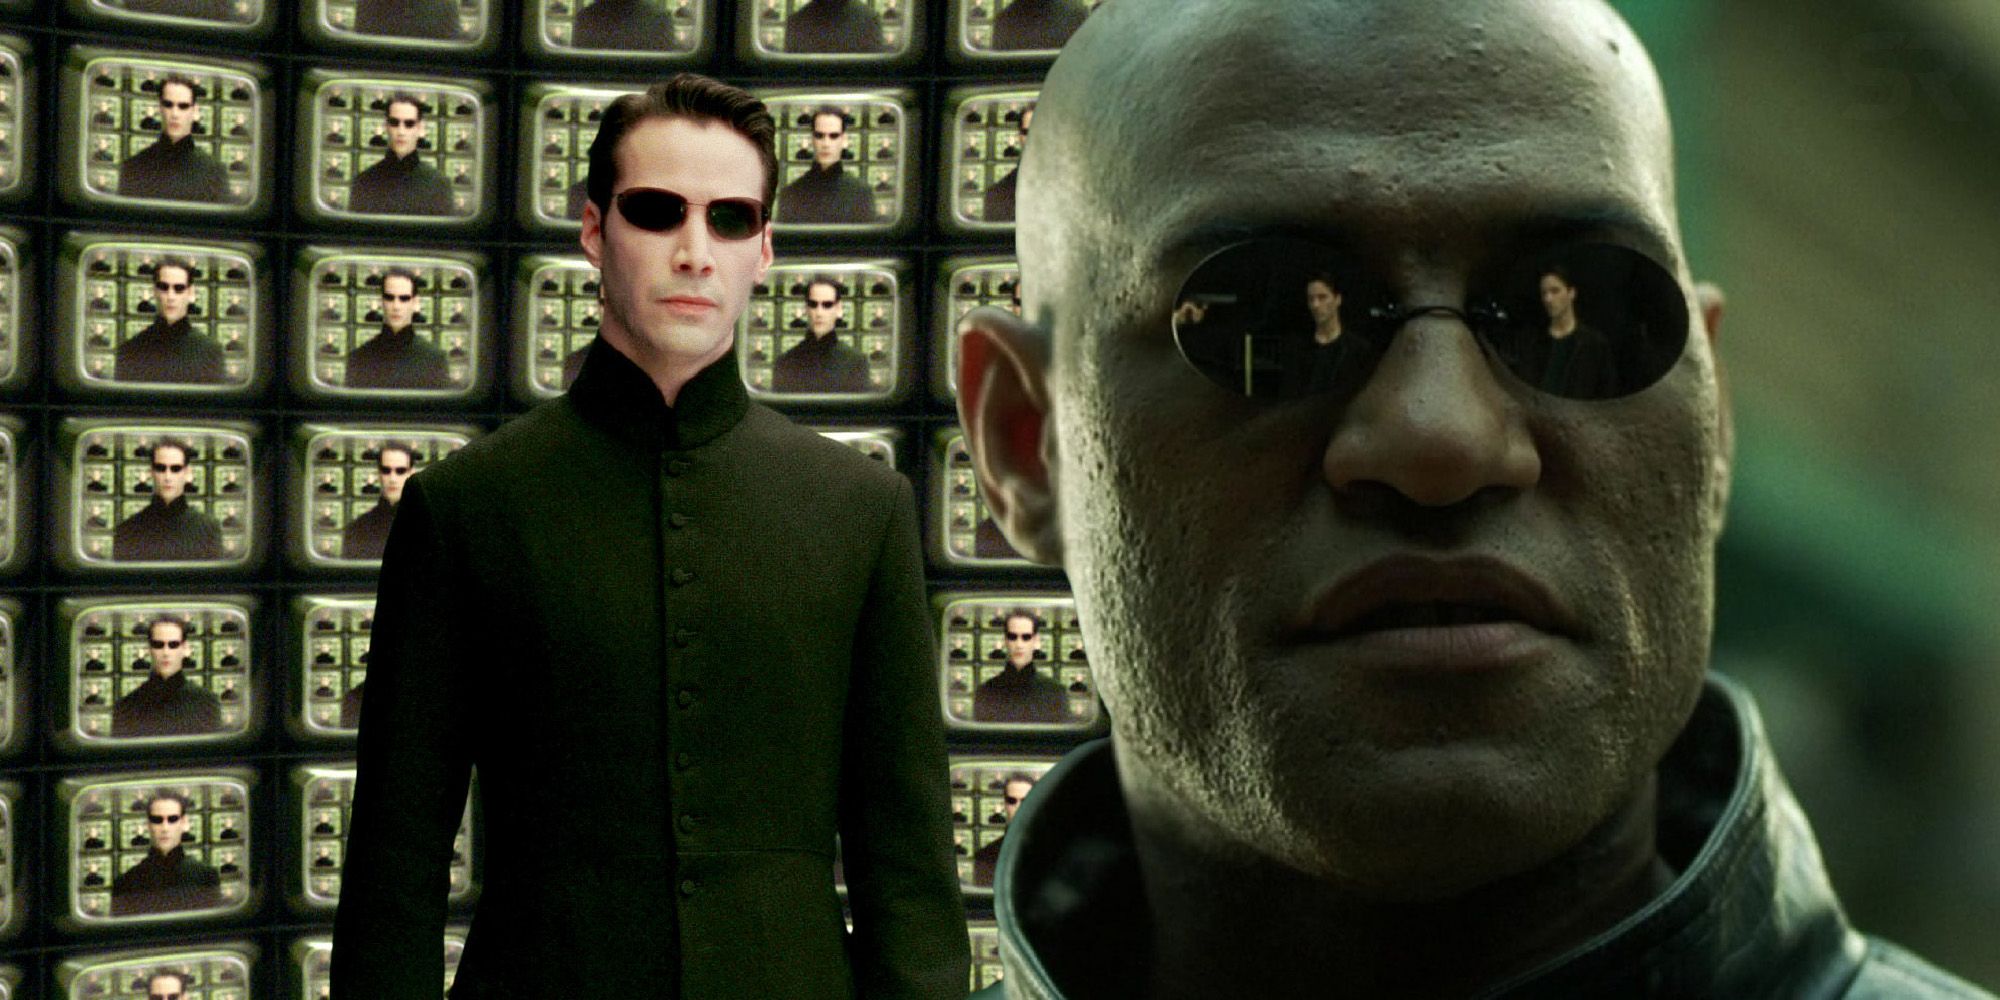 Why does Morpheus need Neo?